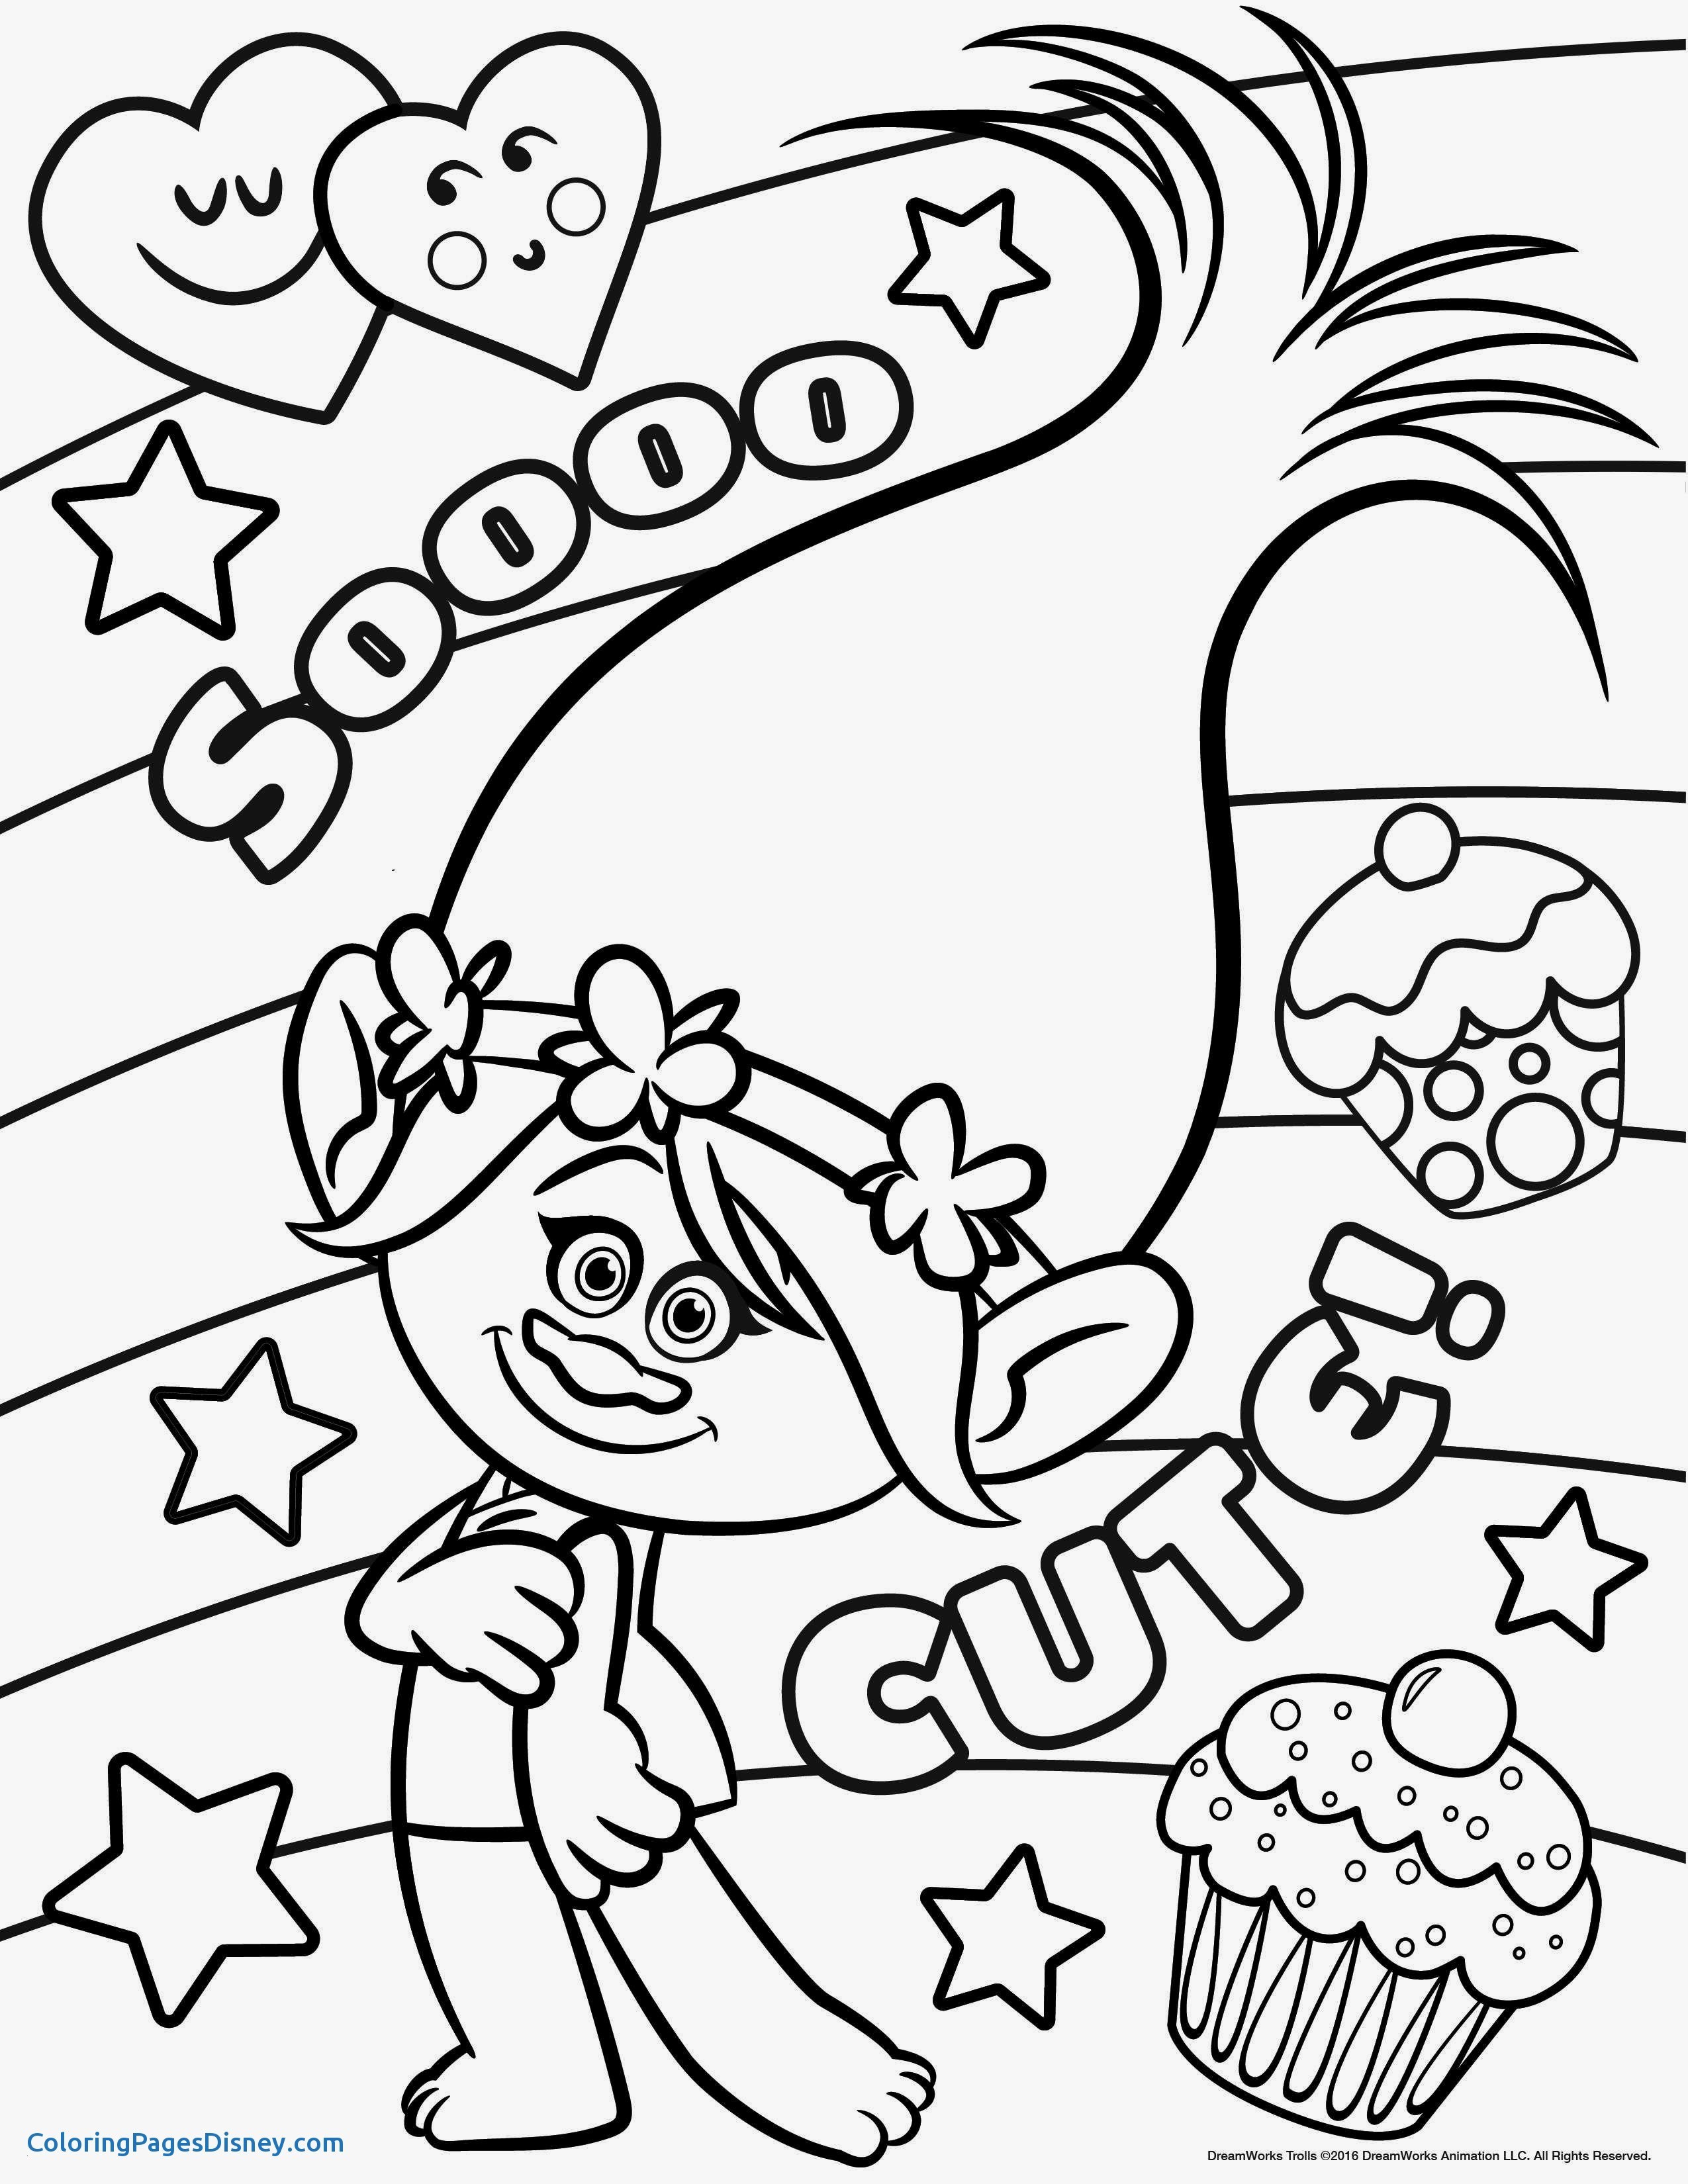 Trolls Coloring Pages Elegant New Poppies Coloring Pages Fresh Print Poppy Trolls Coloring Pages